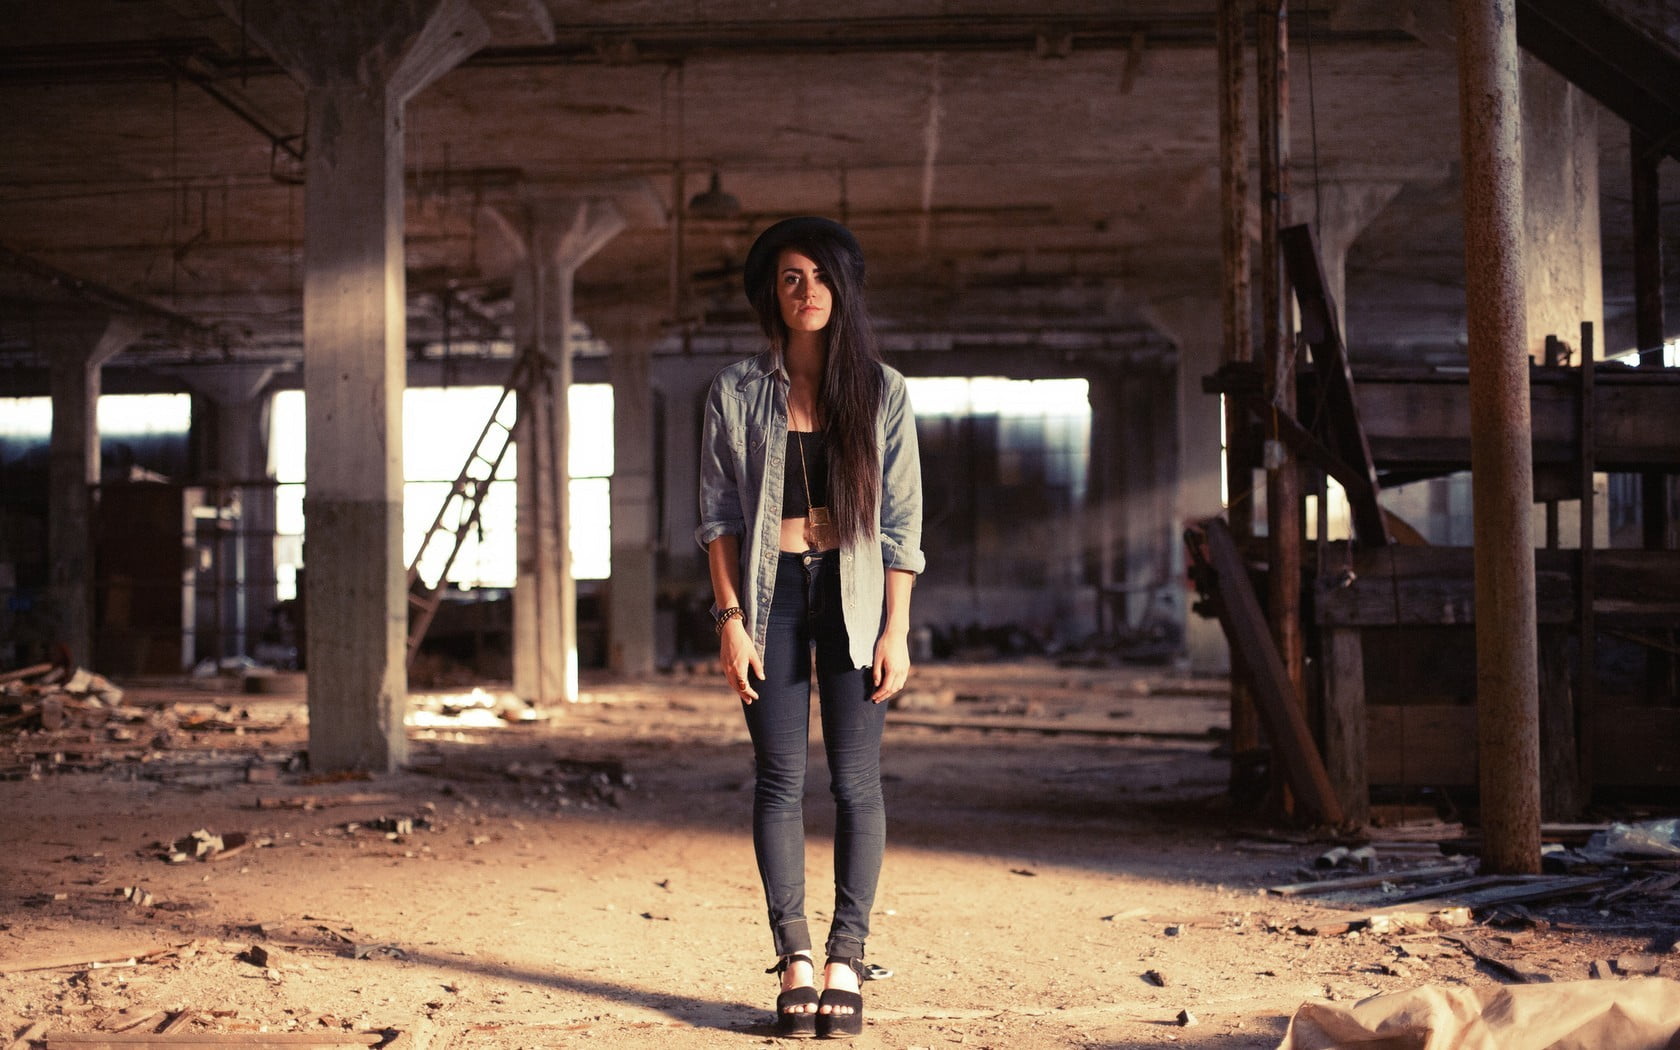 women, hat, ruins, abandoned, model, one person, full length